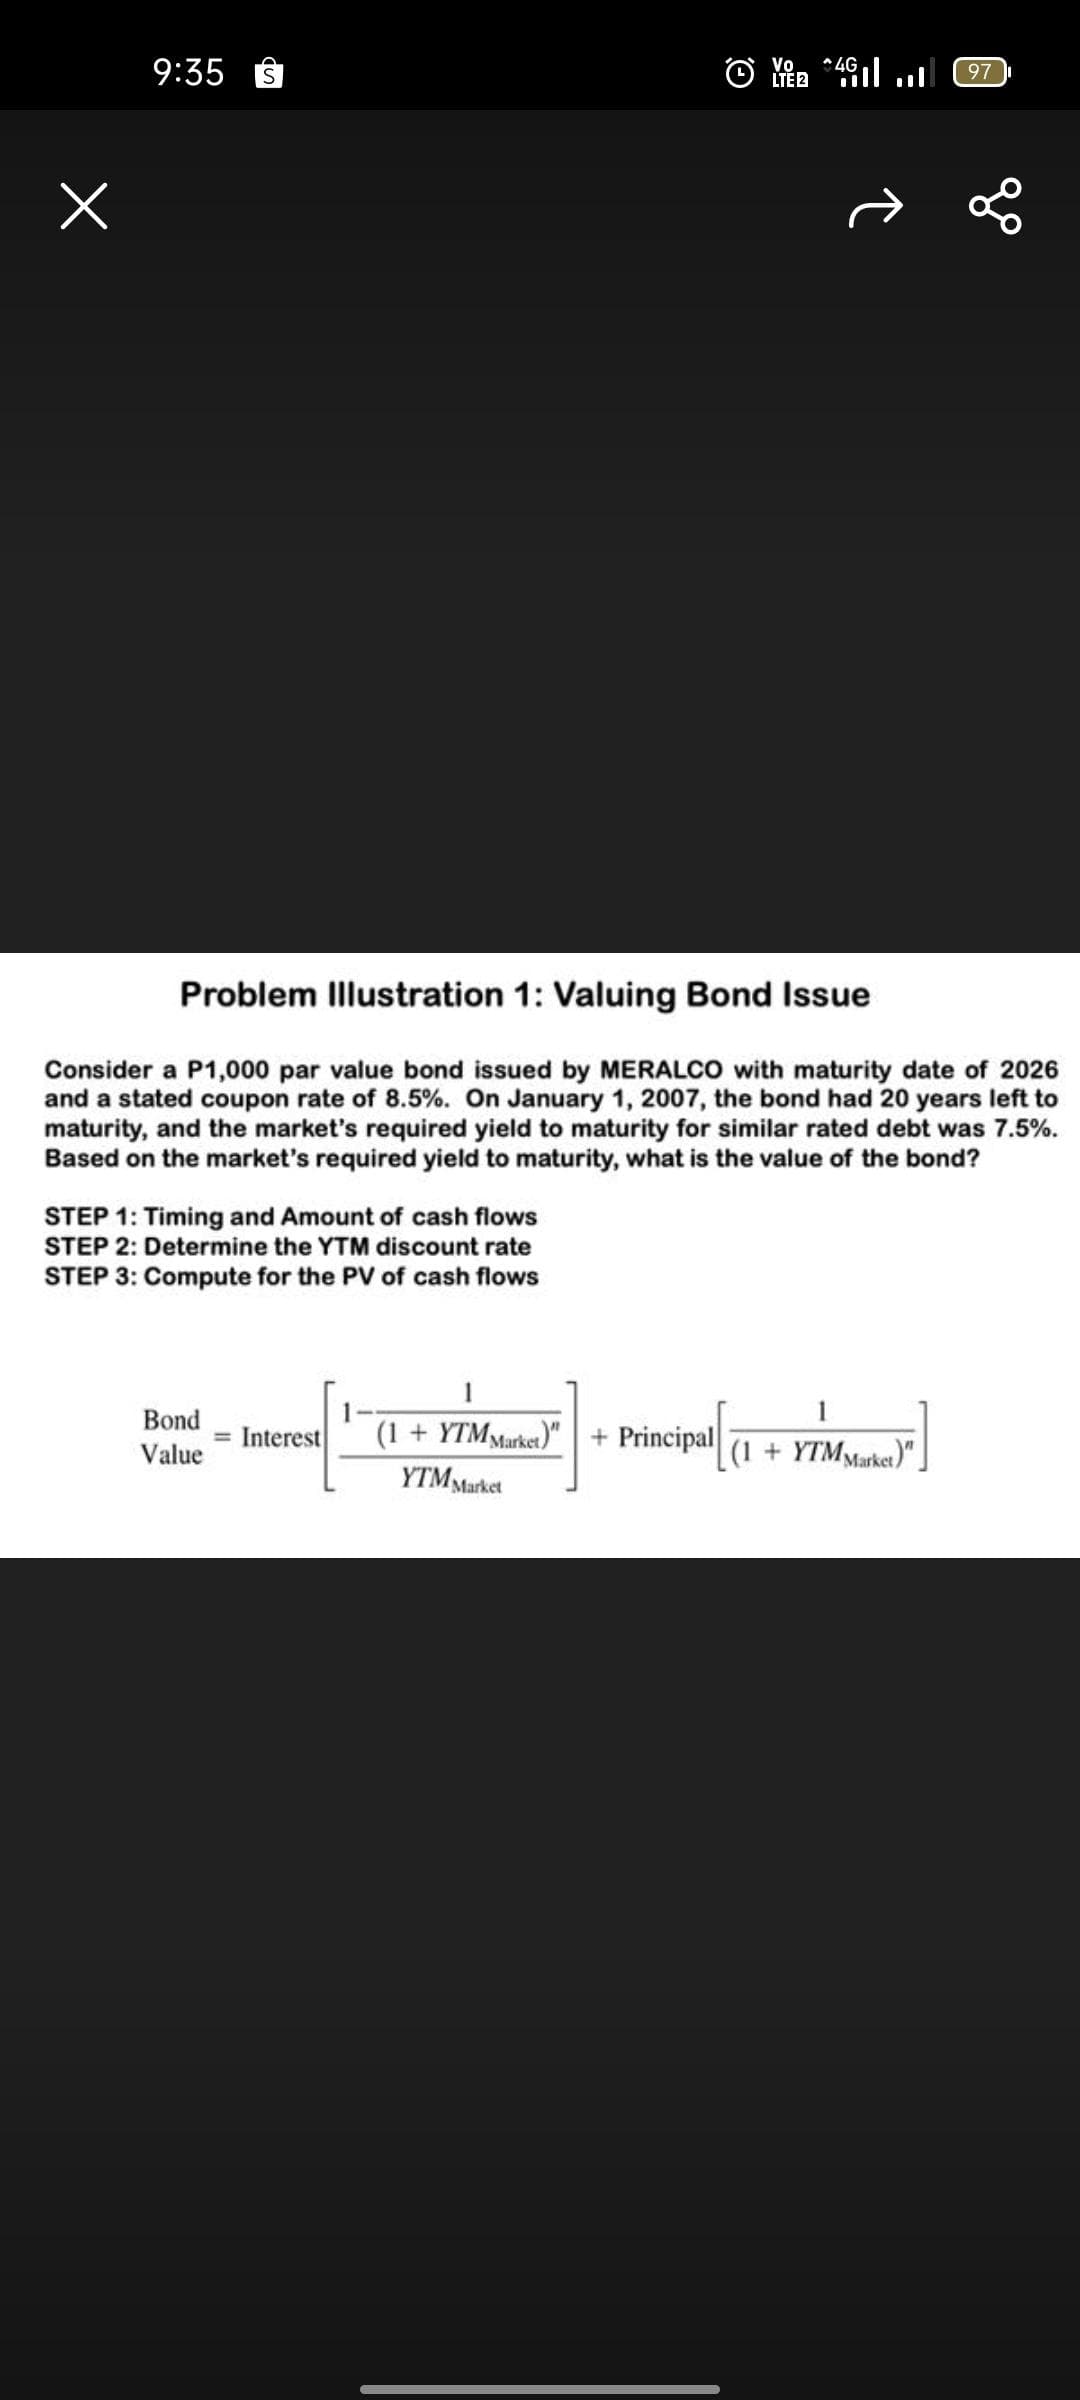 Vo
LTE 2
9:35
S
Problem Illustration 1: Valuing Bond Issue
Consider a P1,000 par value bond issued by MERALCO with maturity date of 2026
and a stated coupon rate of 8.5%. On January 1, 2007, the bond had 20 years left to
maturity, and the market's required yield to maturity for similar rated debt was 7.5%.
Based on the market's required yield to maturity, what is the value of the bond?
STEP 1: Timing and Amount of cash flows
STEP 2: Determine the YTM discount rate
STEP 3: Compute for the PV of cash flows
1
Bond
= Interest
Value
(1 + YTM Market)" + Principal
(1 + YTM Market)"
YTM Market
4G
97
go